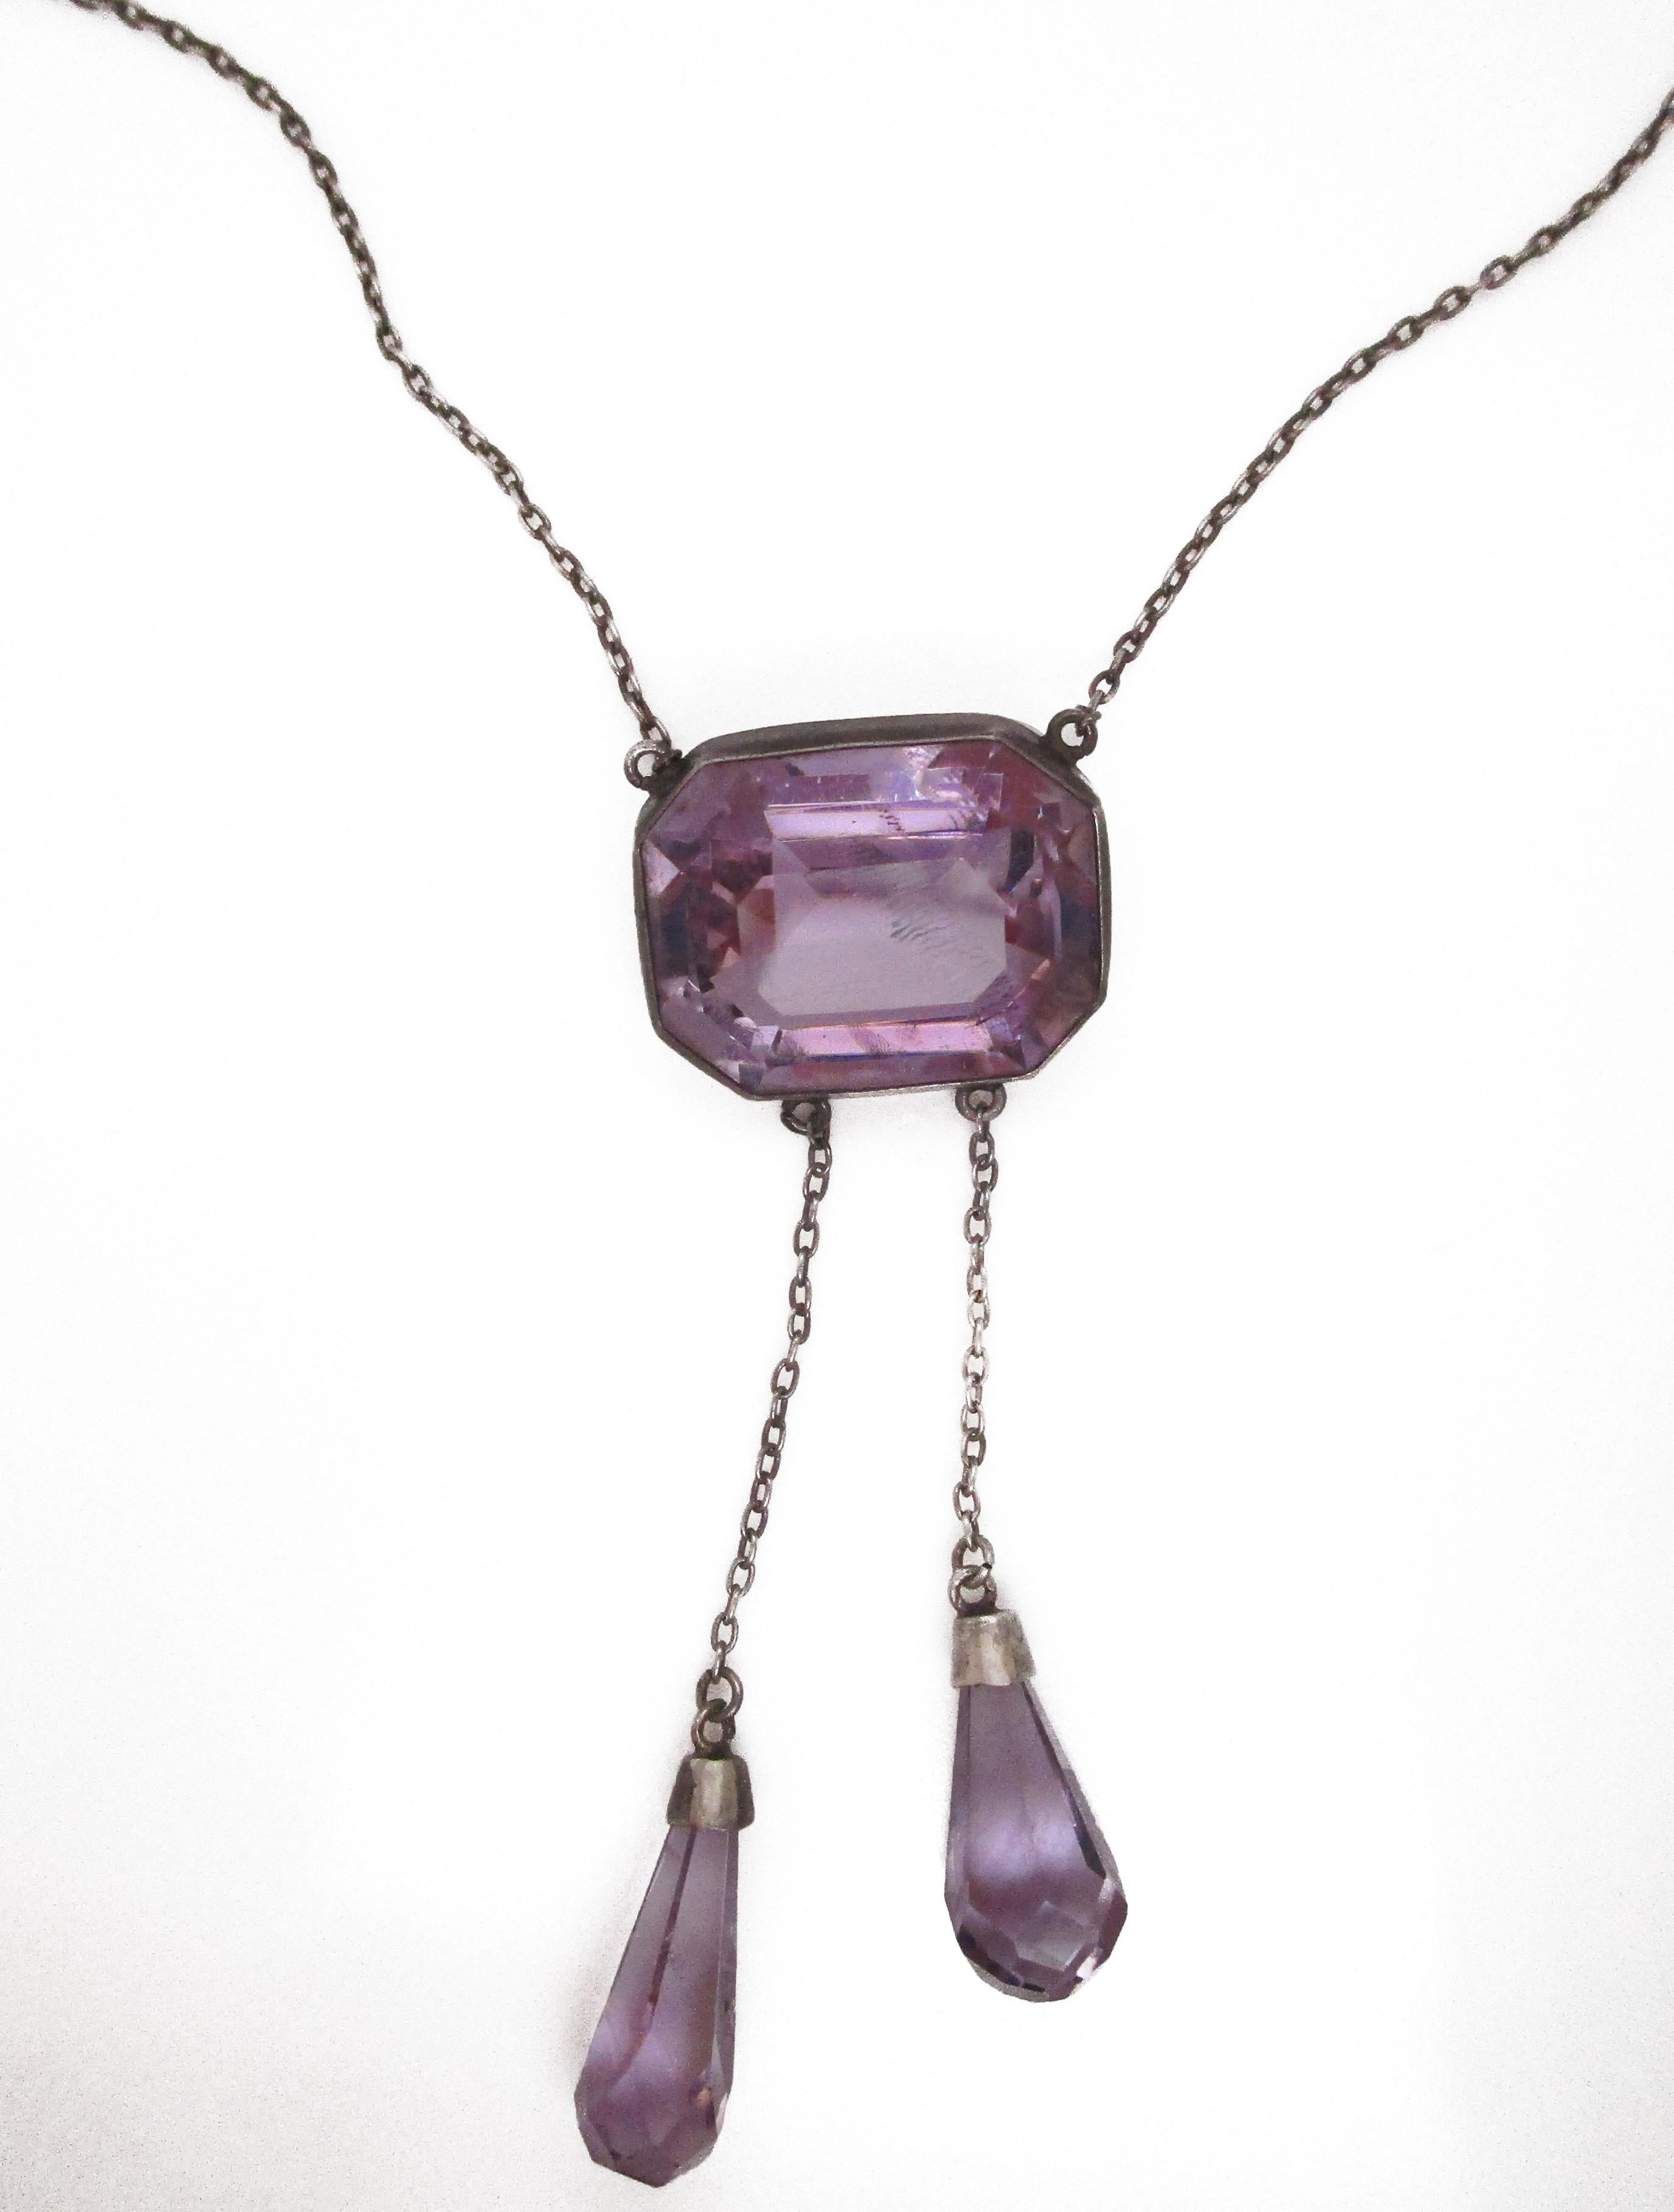 Briolette Cut Edwardian Austrian Sterling Silver and Amethyst Negligee Necklace with Briolette